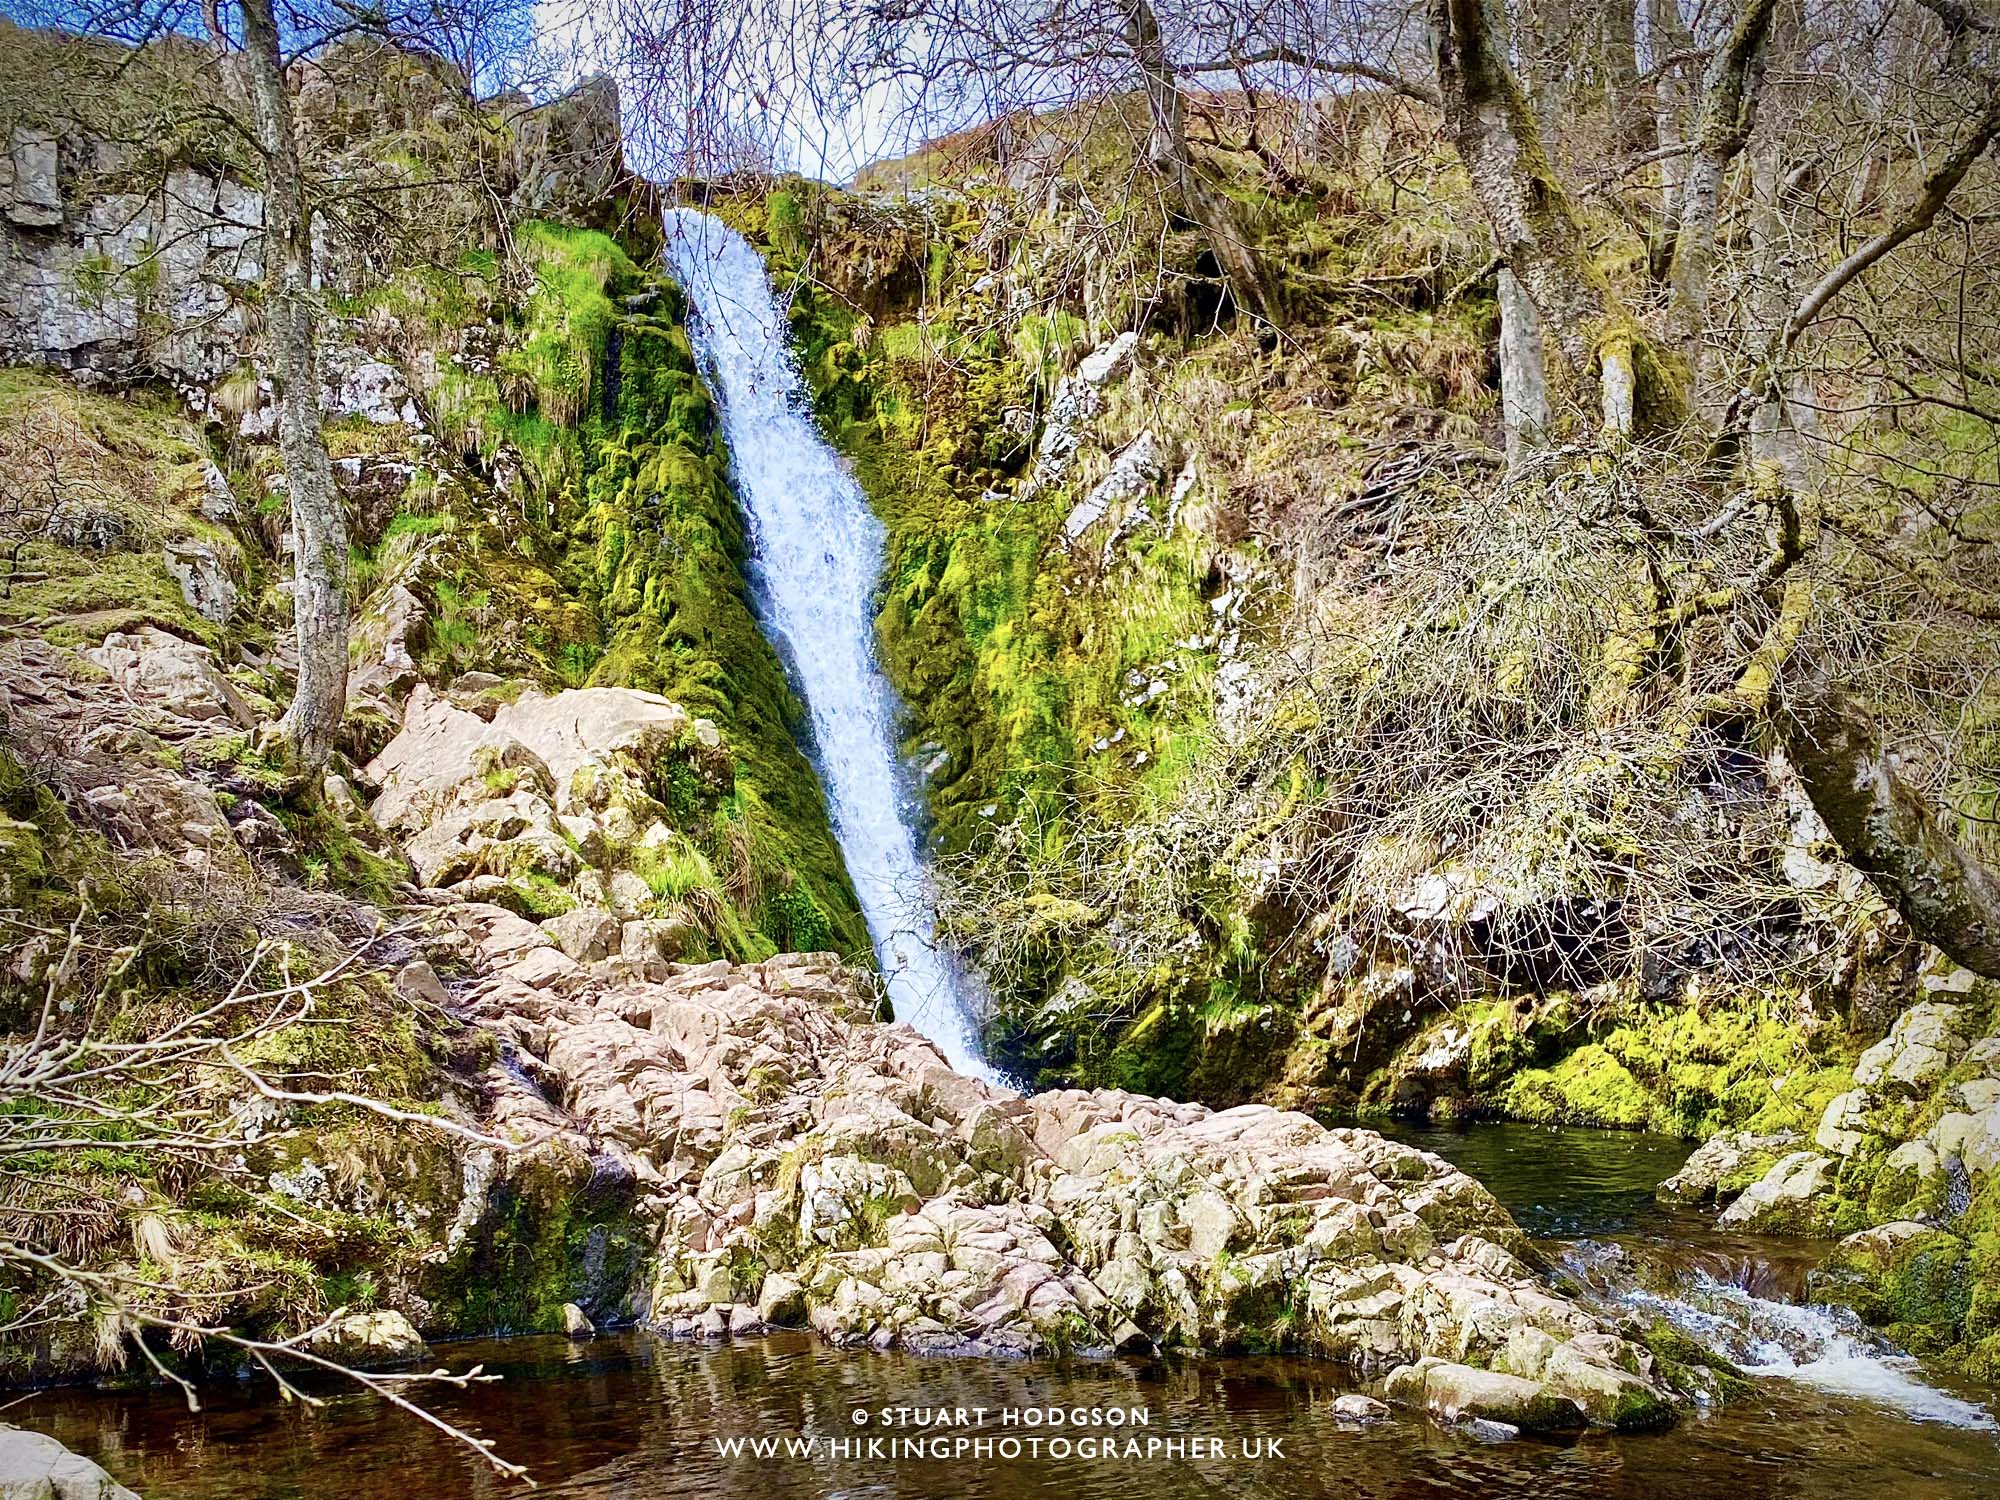 Spout waterfall walk and wild swimming in Northumberland | The Hiking Photographer